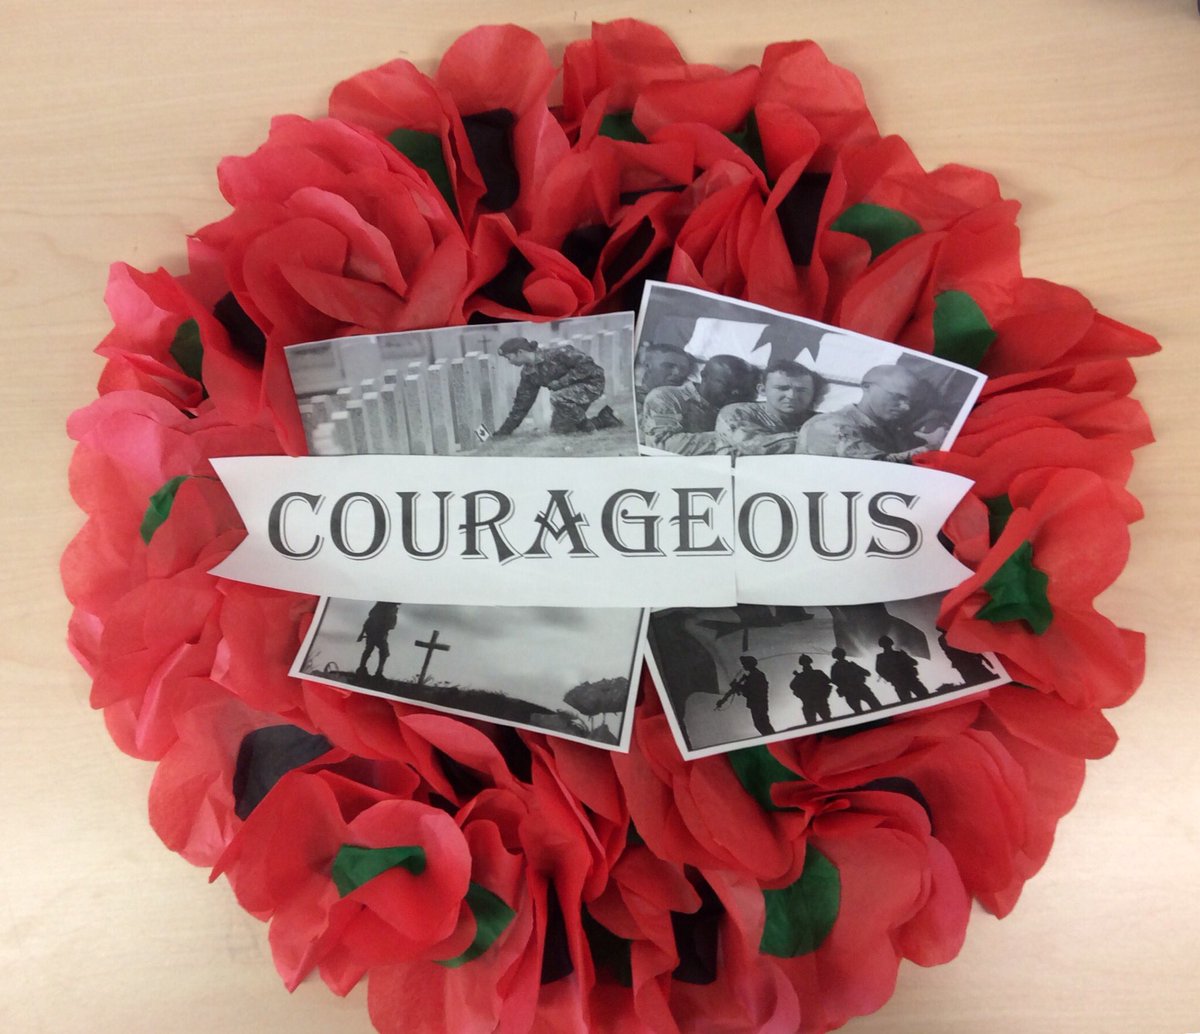 Your courageousness paid the ultimate price for our freedom. Thank you! #Peelremembers